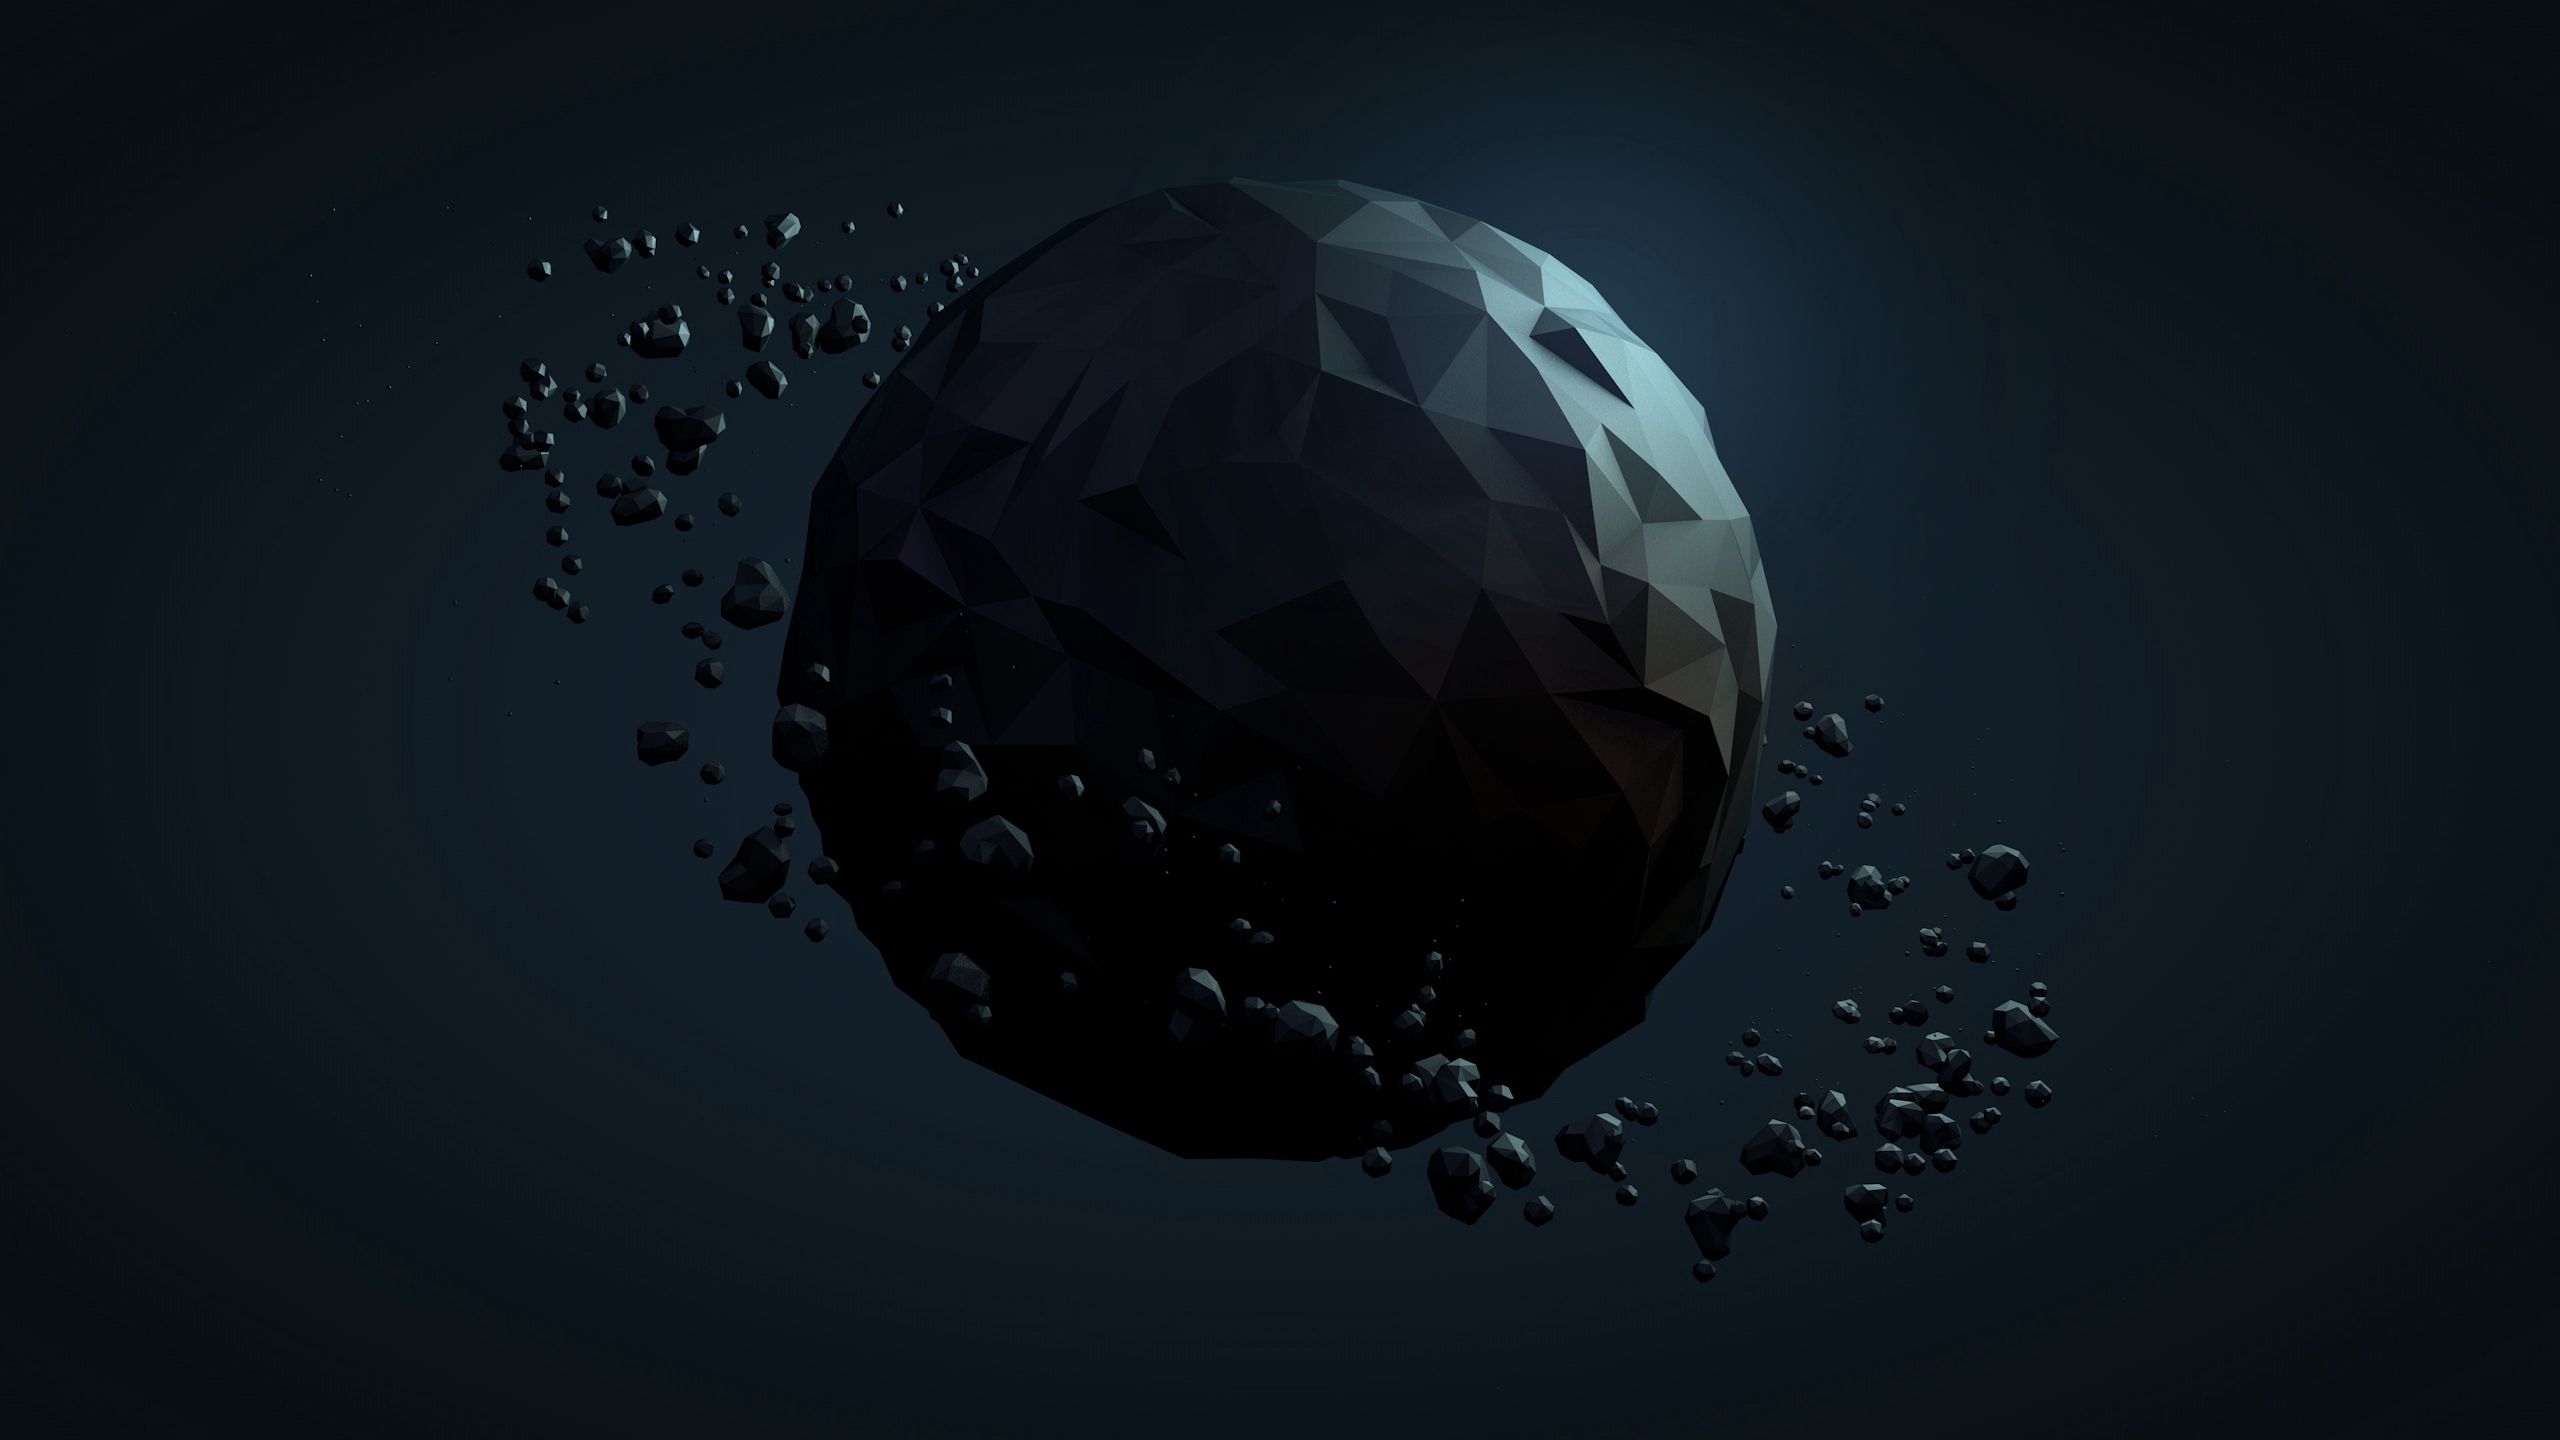 dark, planet, abstract, background, ball phone background